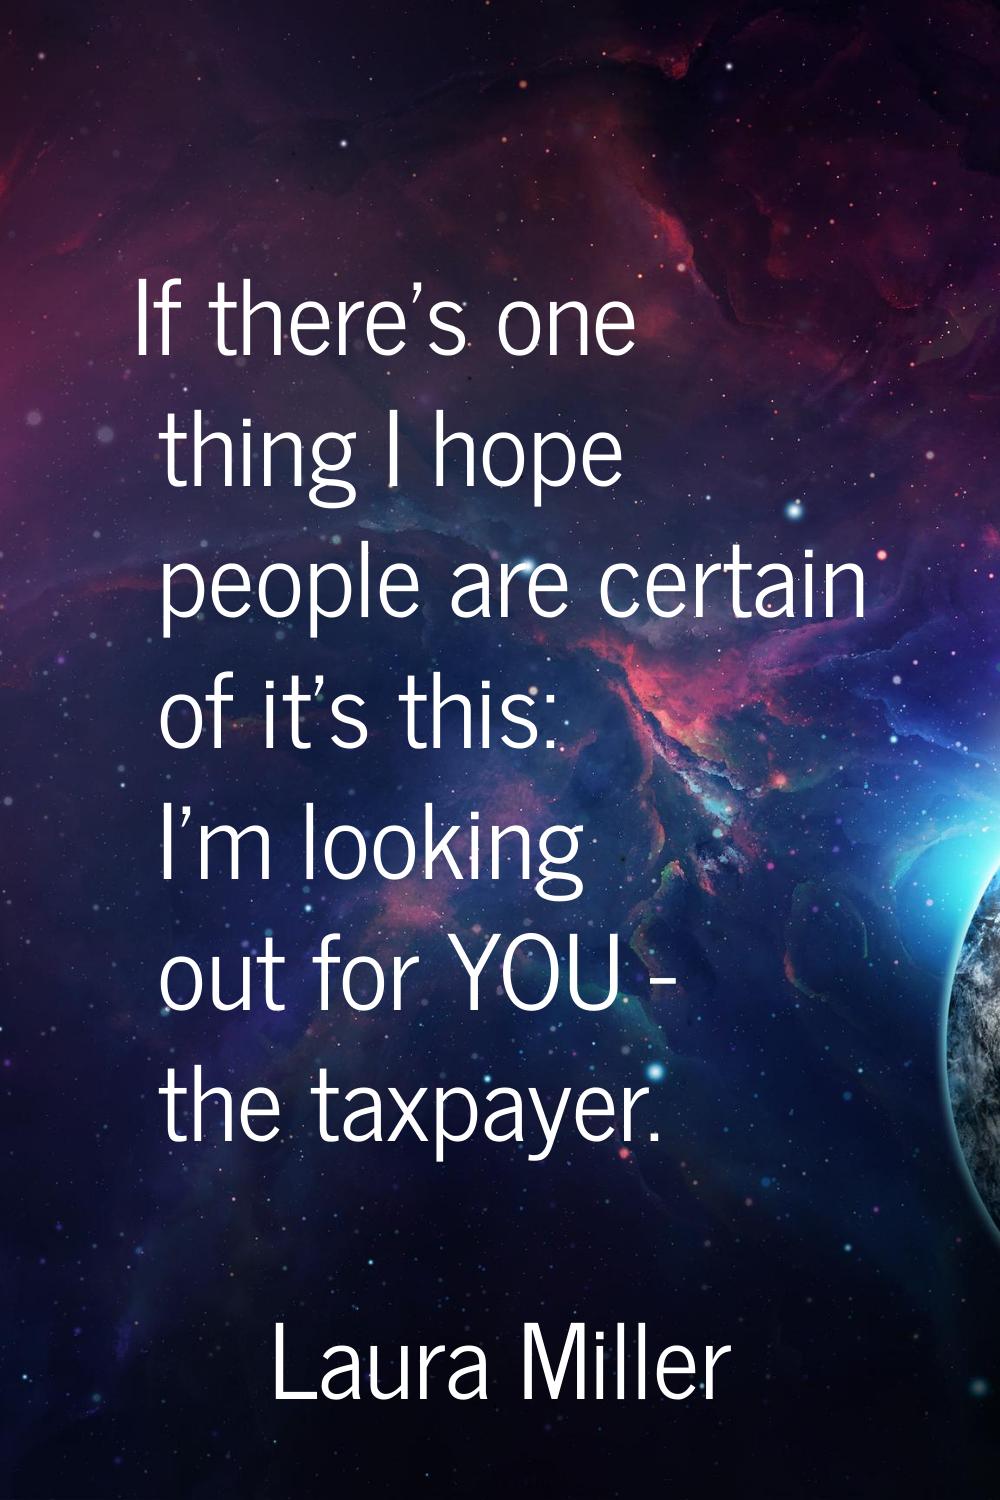 If there's one thing I hope people are certain of it's this: I'm looking out for YOU - the taxpayer